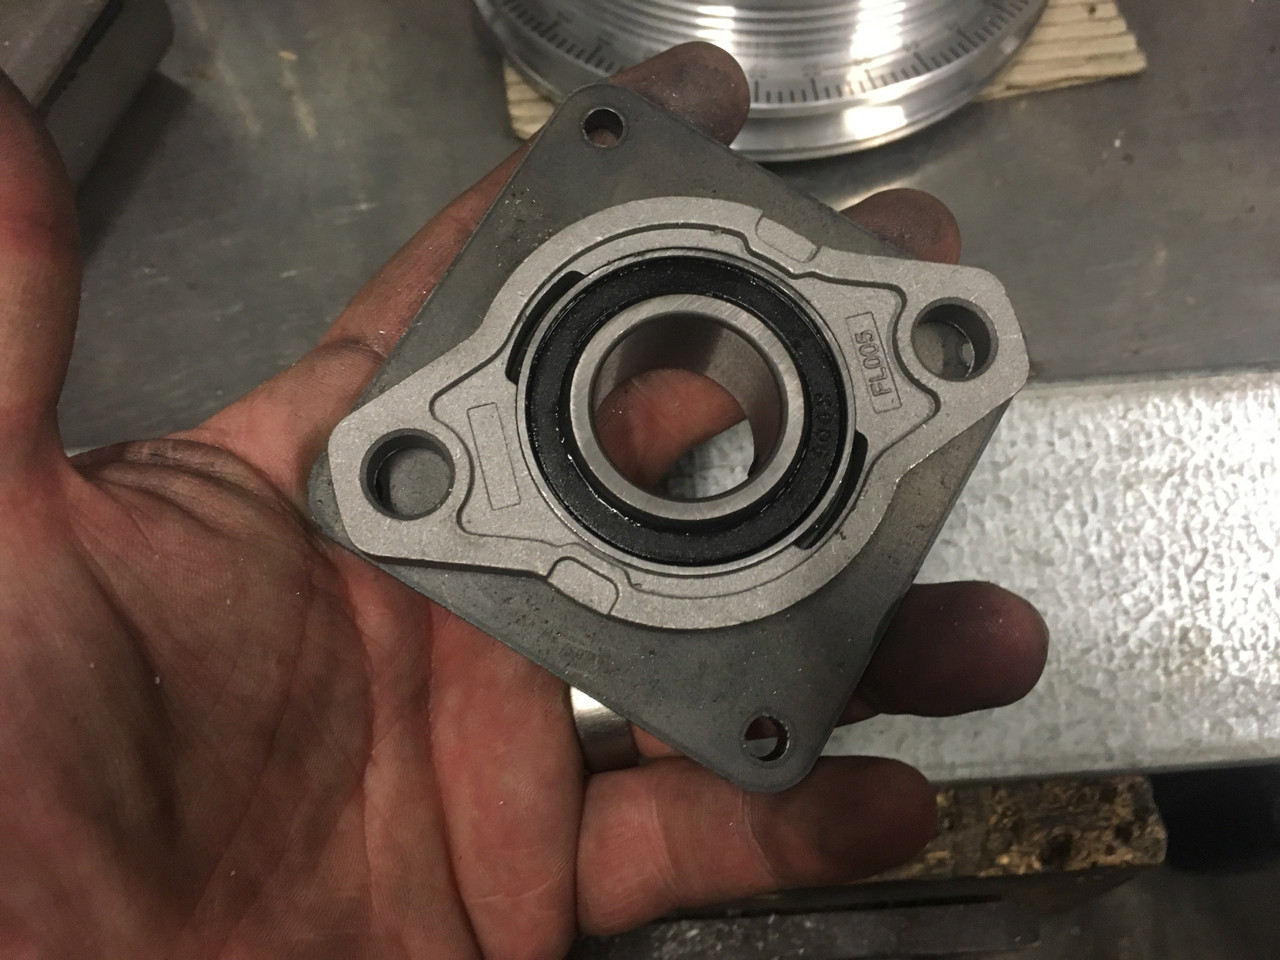 Mearing in moutning plate - The bearing sits inside of the mounting plate